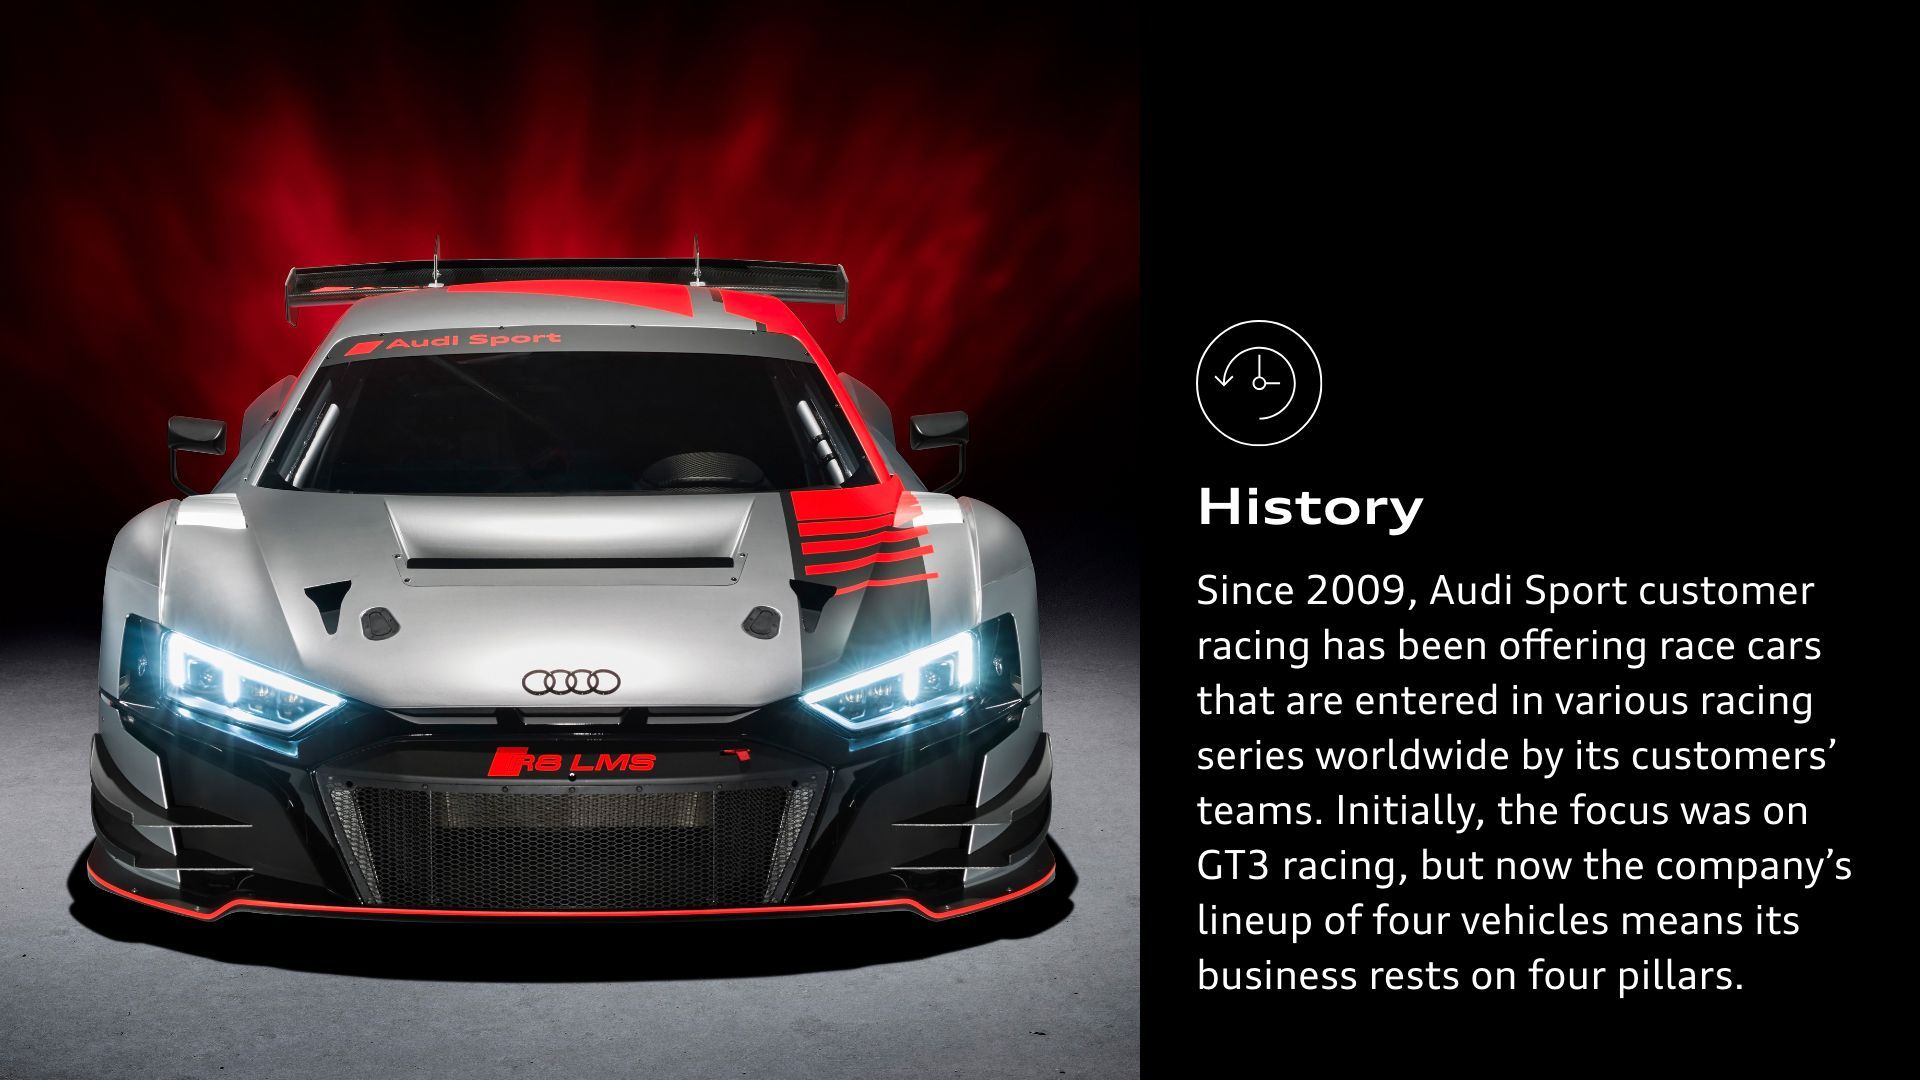 History: Since 2009, Audi Sport customer racing has been offering race cars that are entered in various racing series worldwide by its customers’ teams. Initially, the focus was on GT3 racing, but now the company’s lineup of four vehicles means its business rests on four pillars.